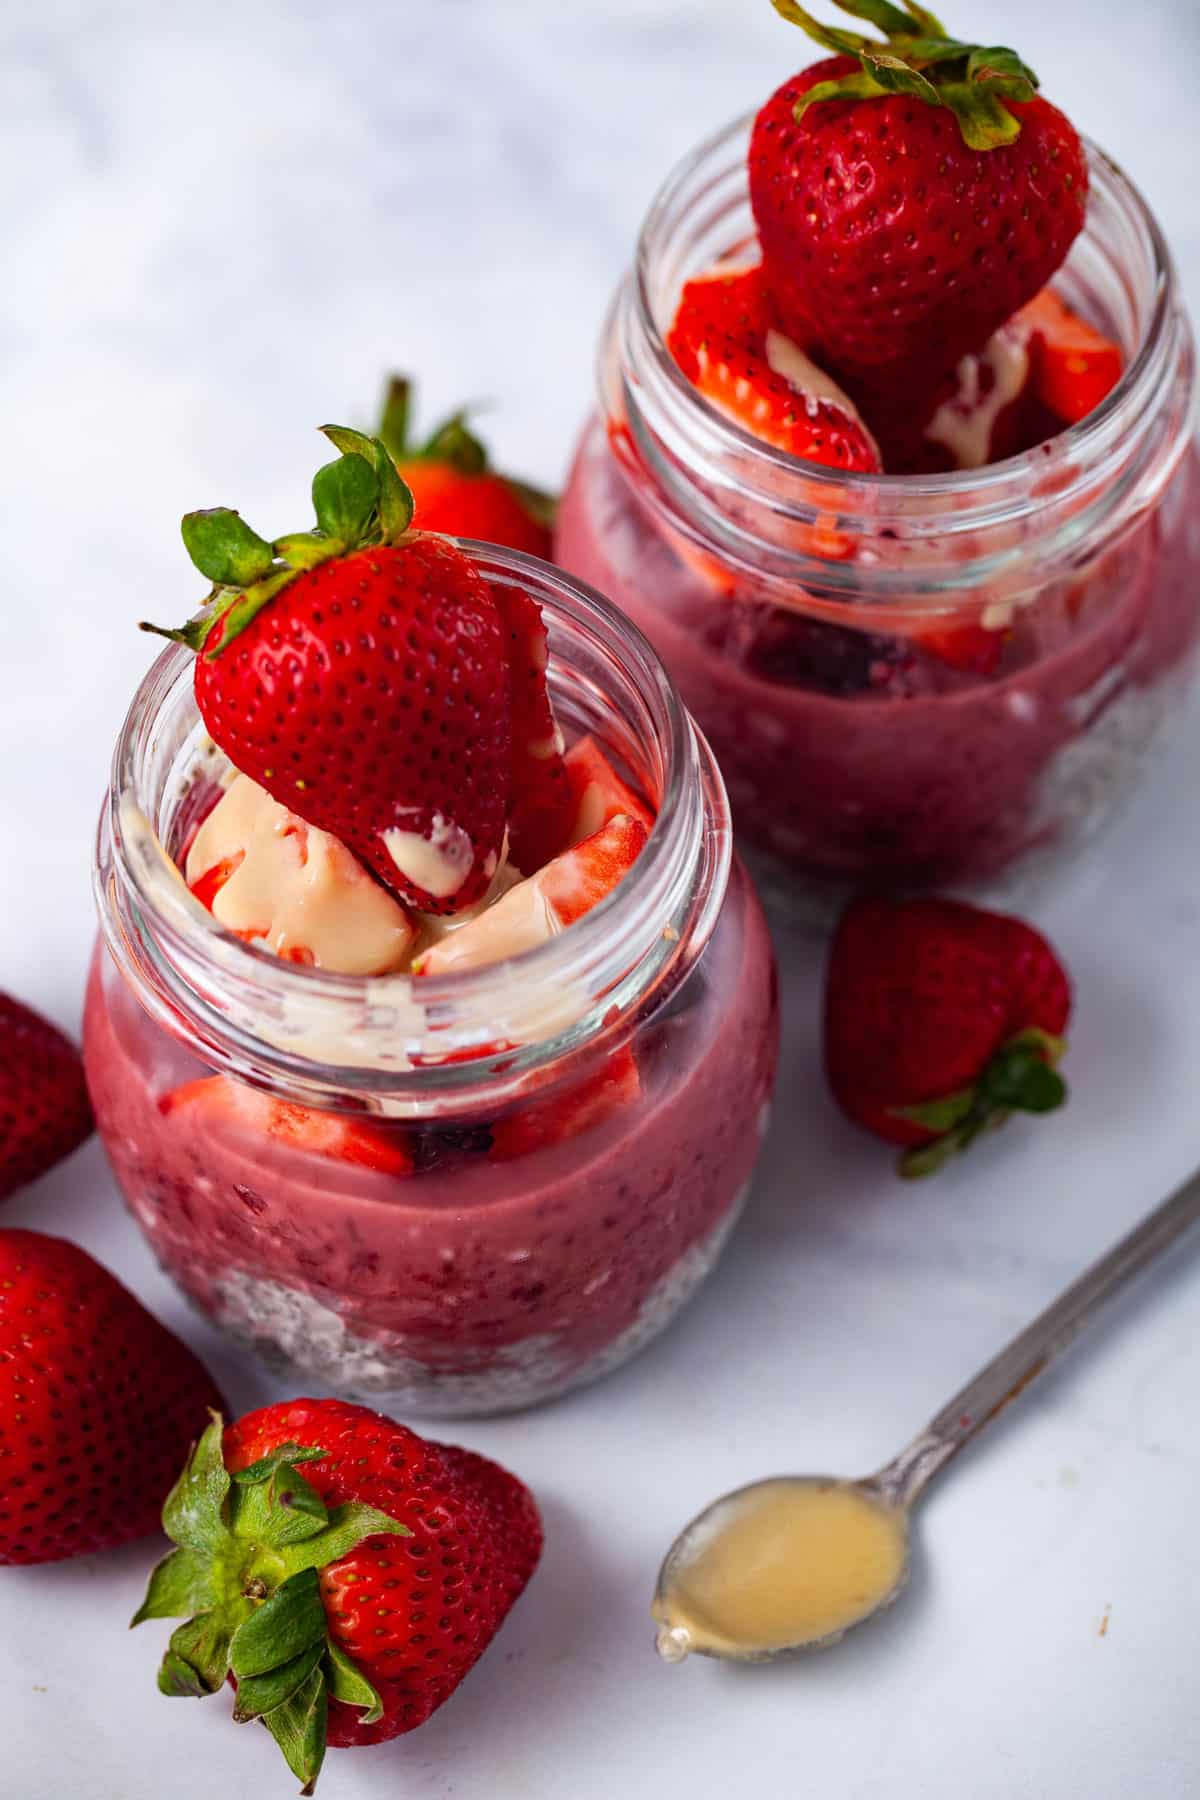 Two small jars filled with chia pudding, infused with a berry sauce, and topped with fresh strawberries and a drizzle of Tahini butter.